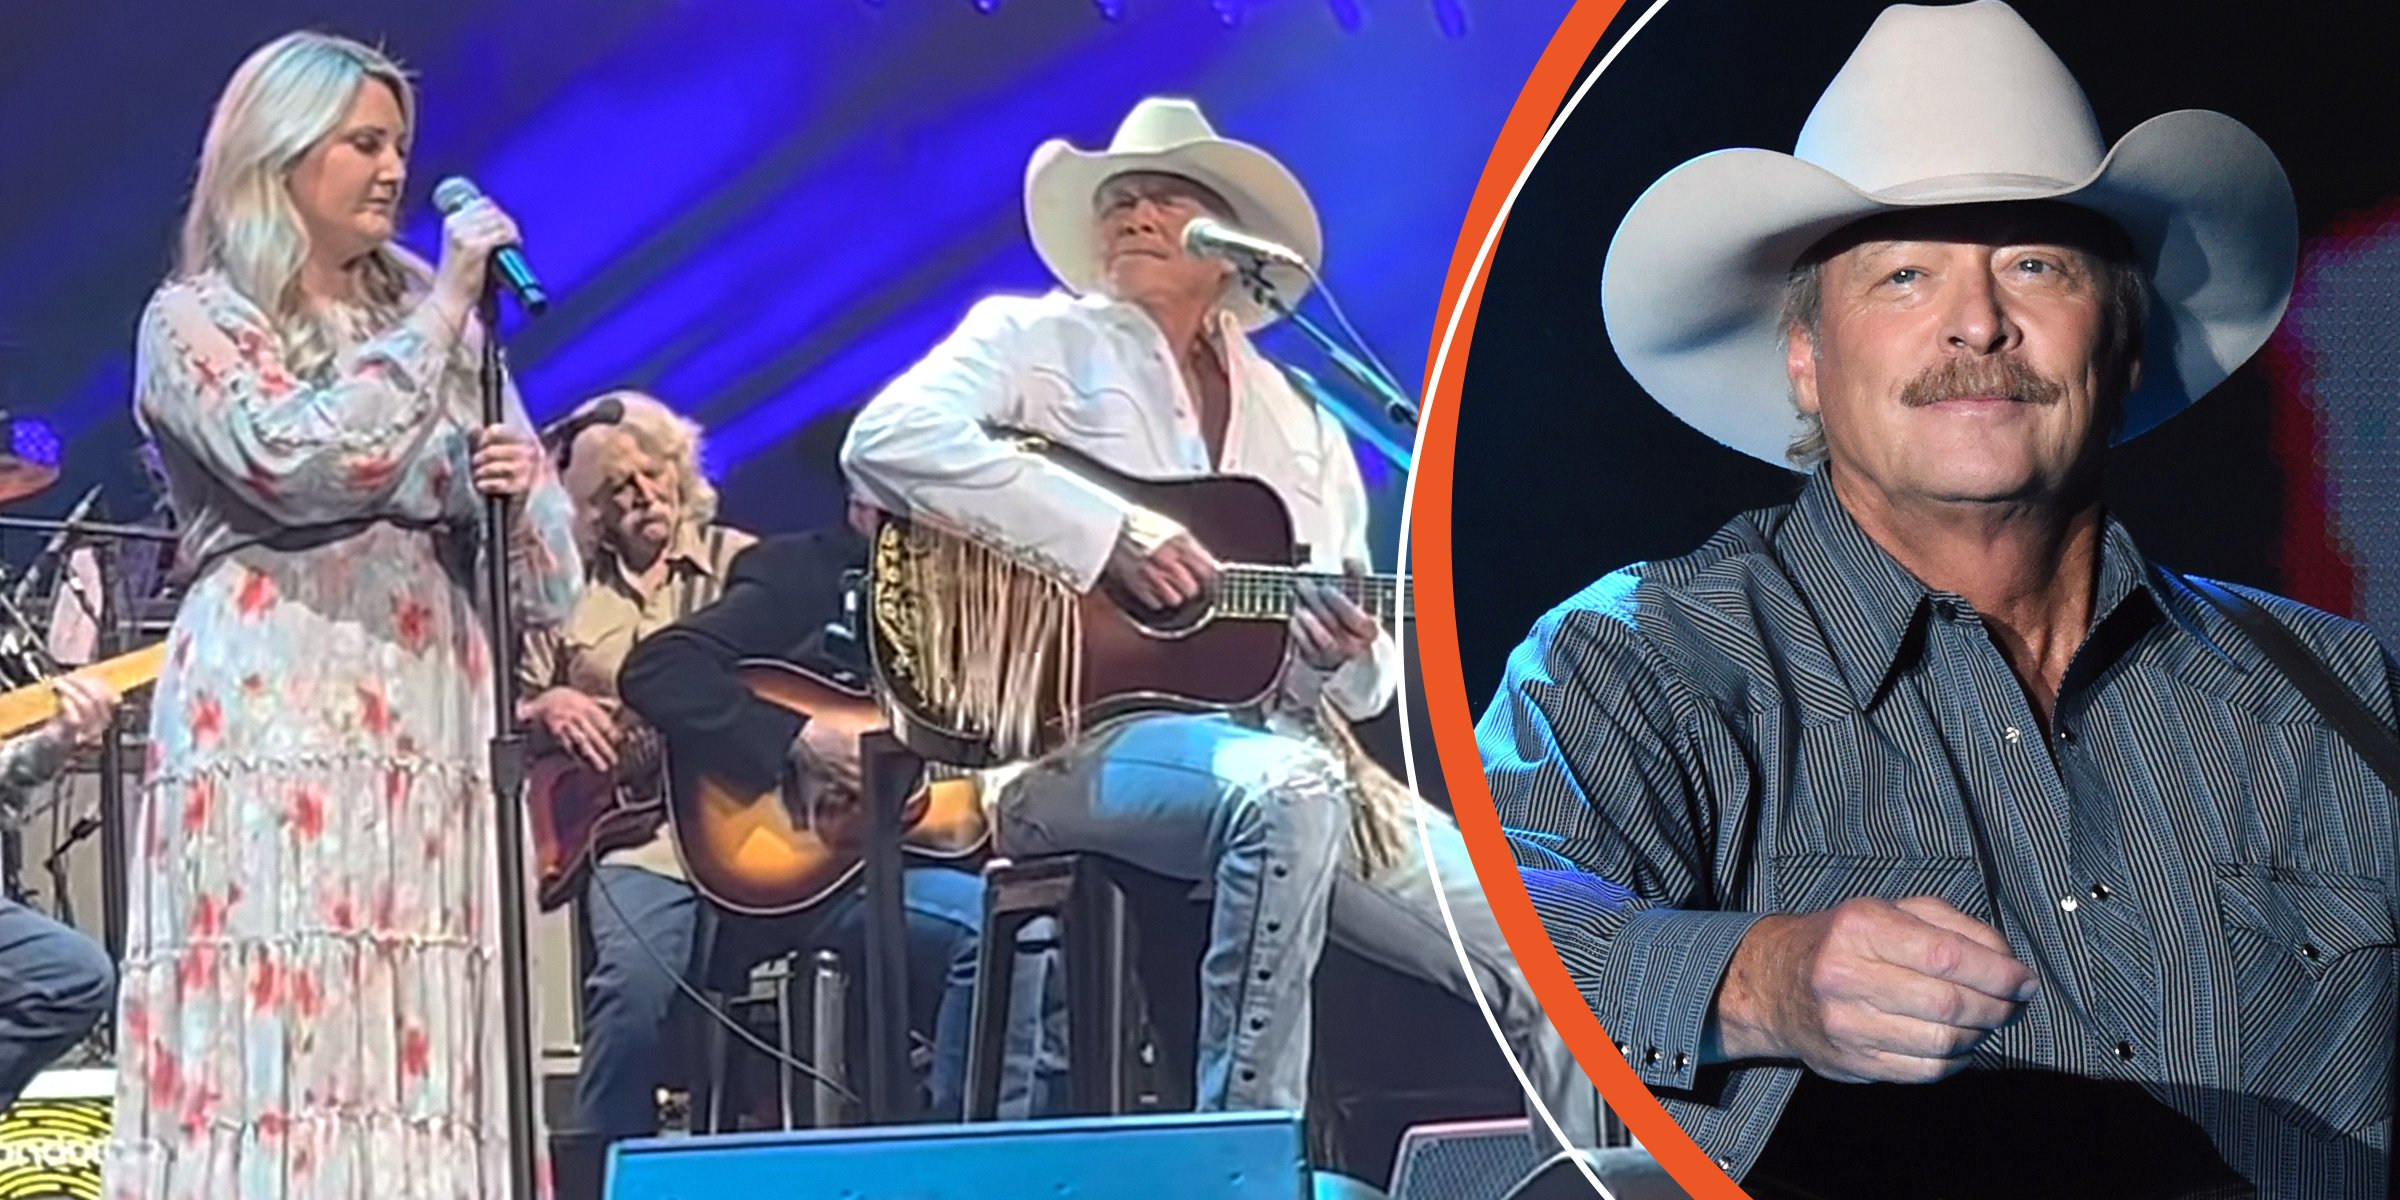 Alexandra Jane Jackson singing with ther dad Alan Jackson. | Country singer Alan Jackson.| Source: youtube.com/Roger Fregoso  Getty Images